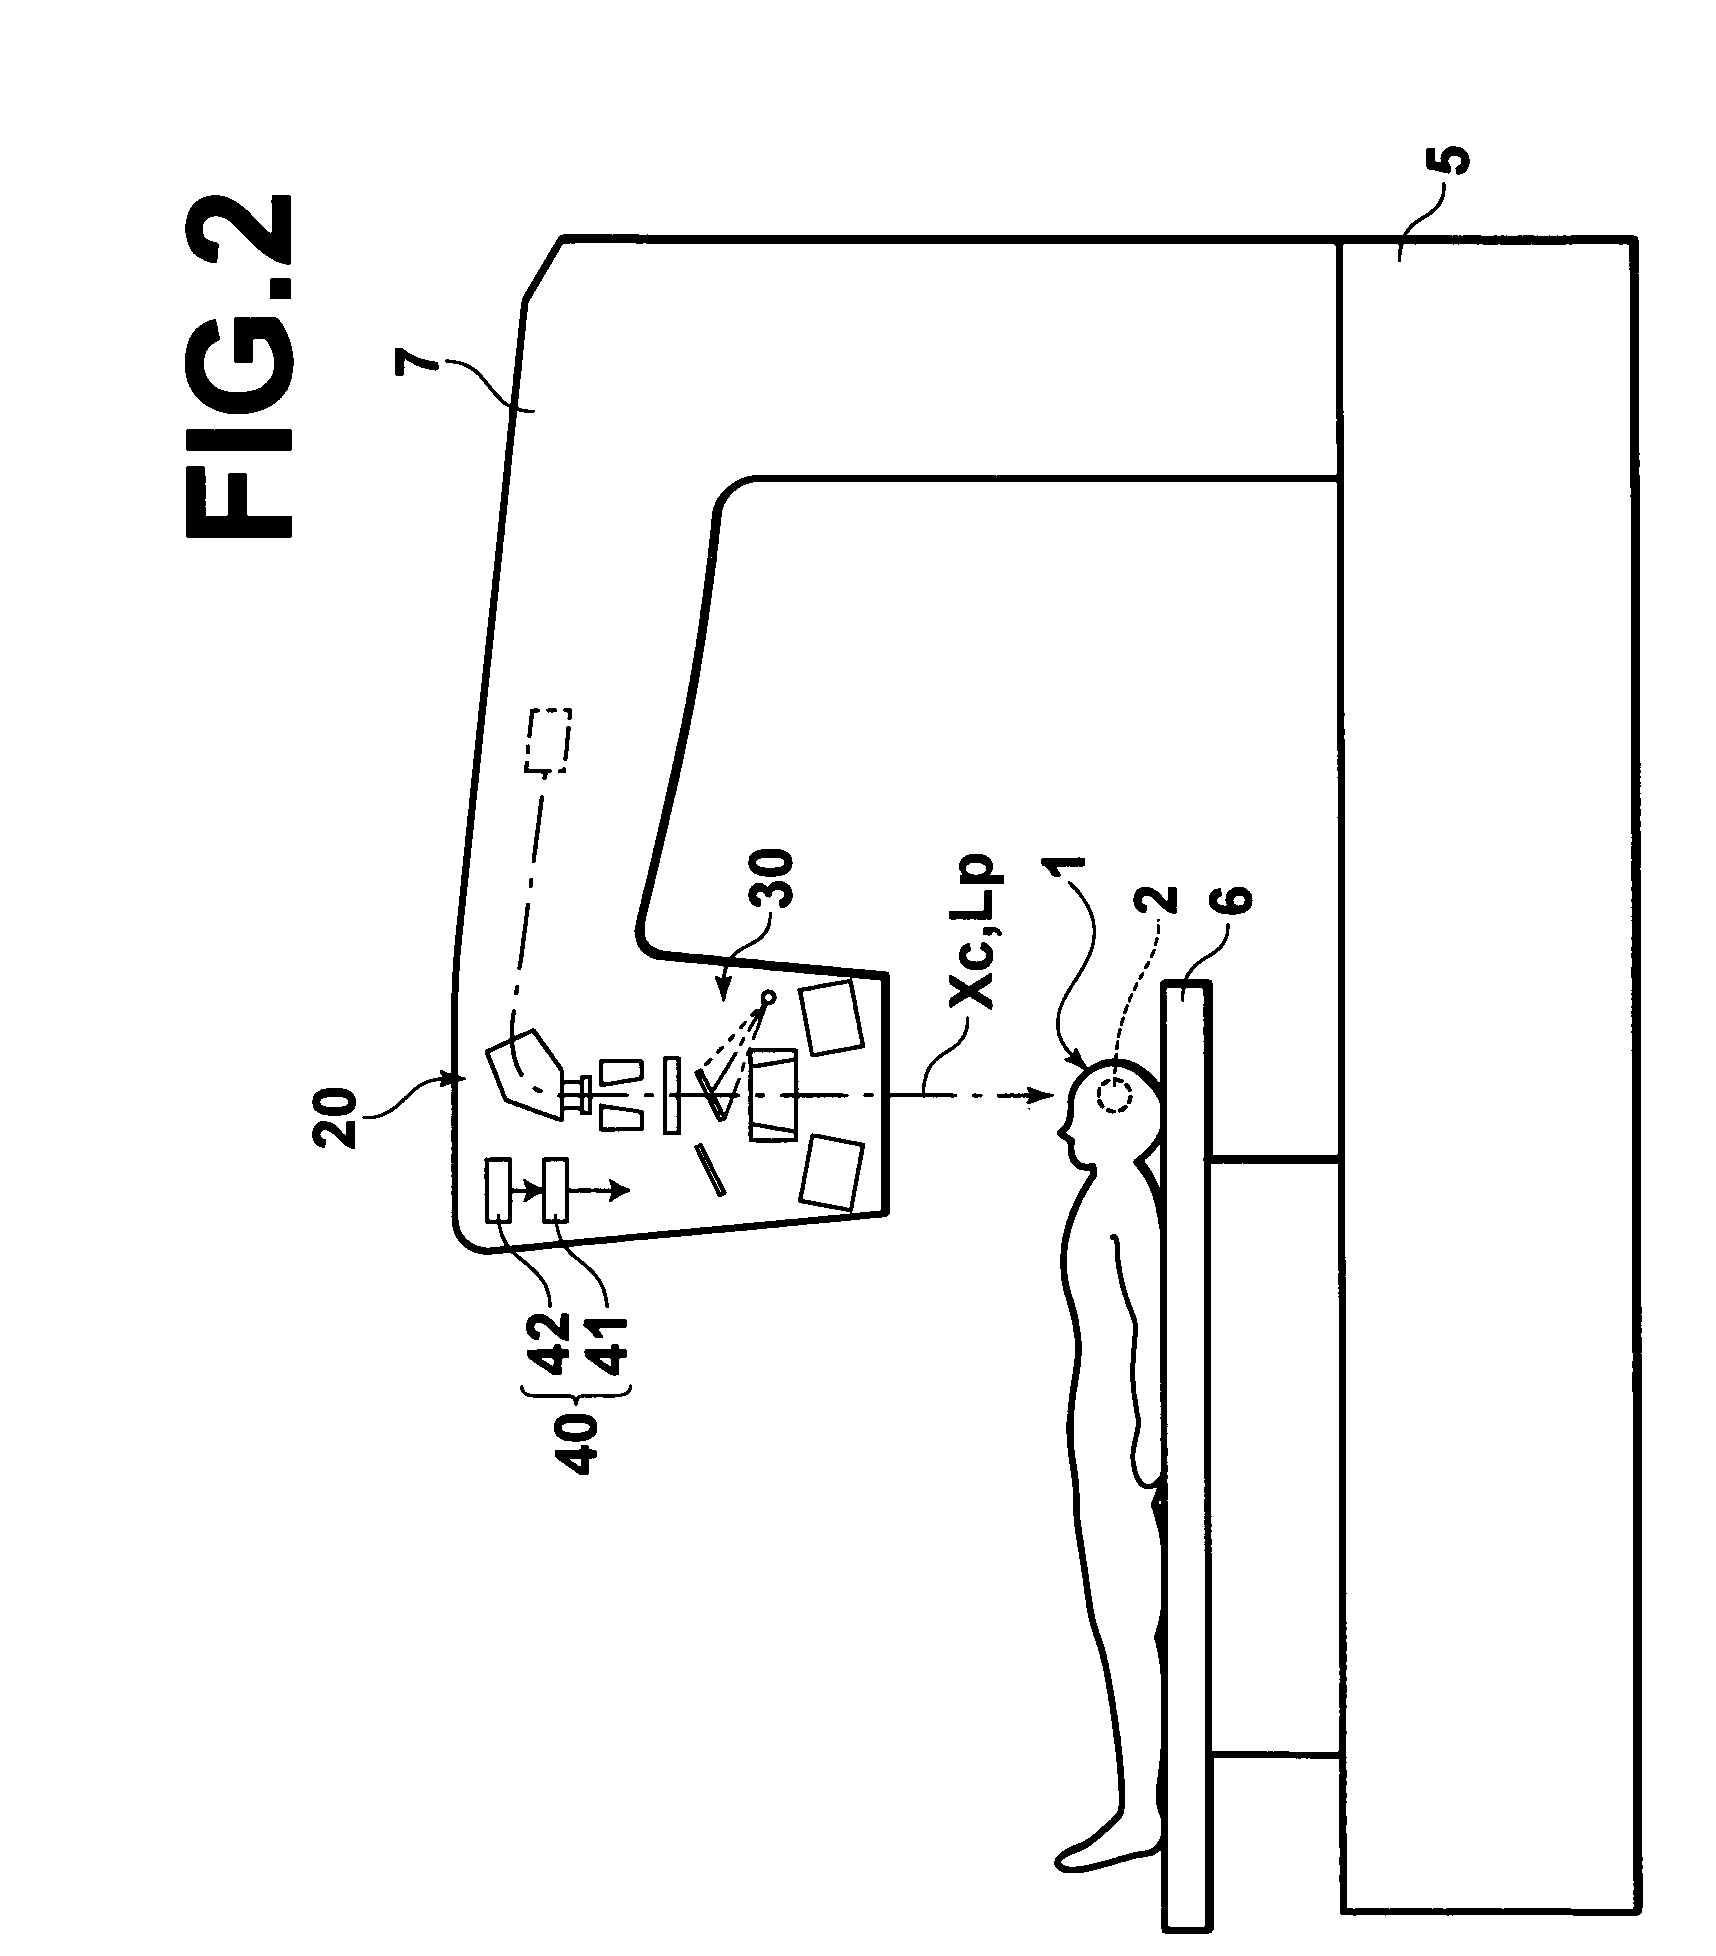 Quality control system for irradiation apparatus